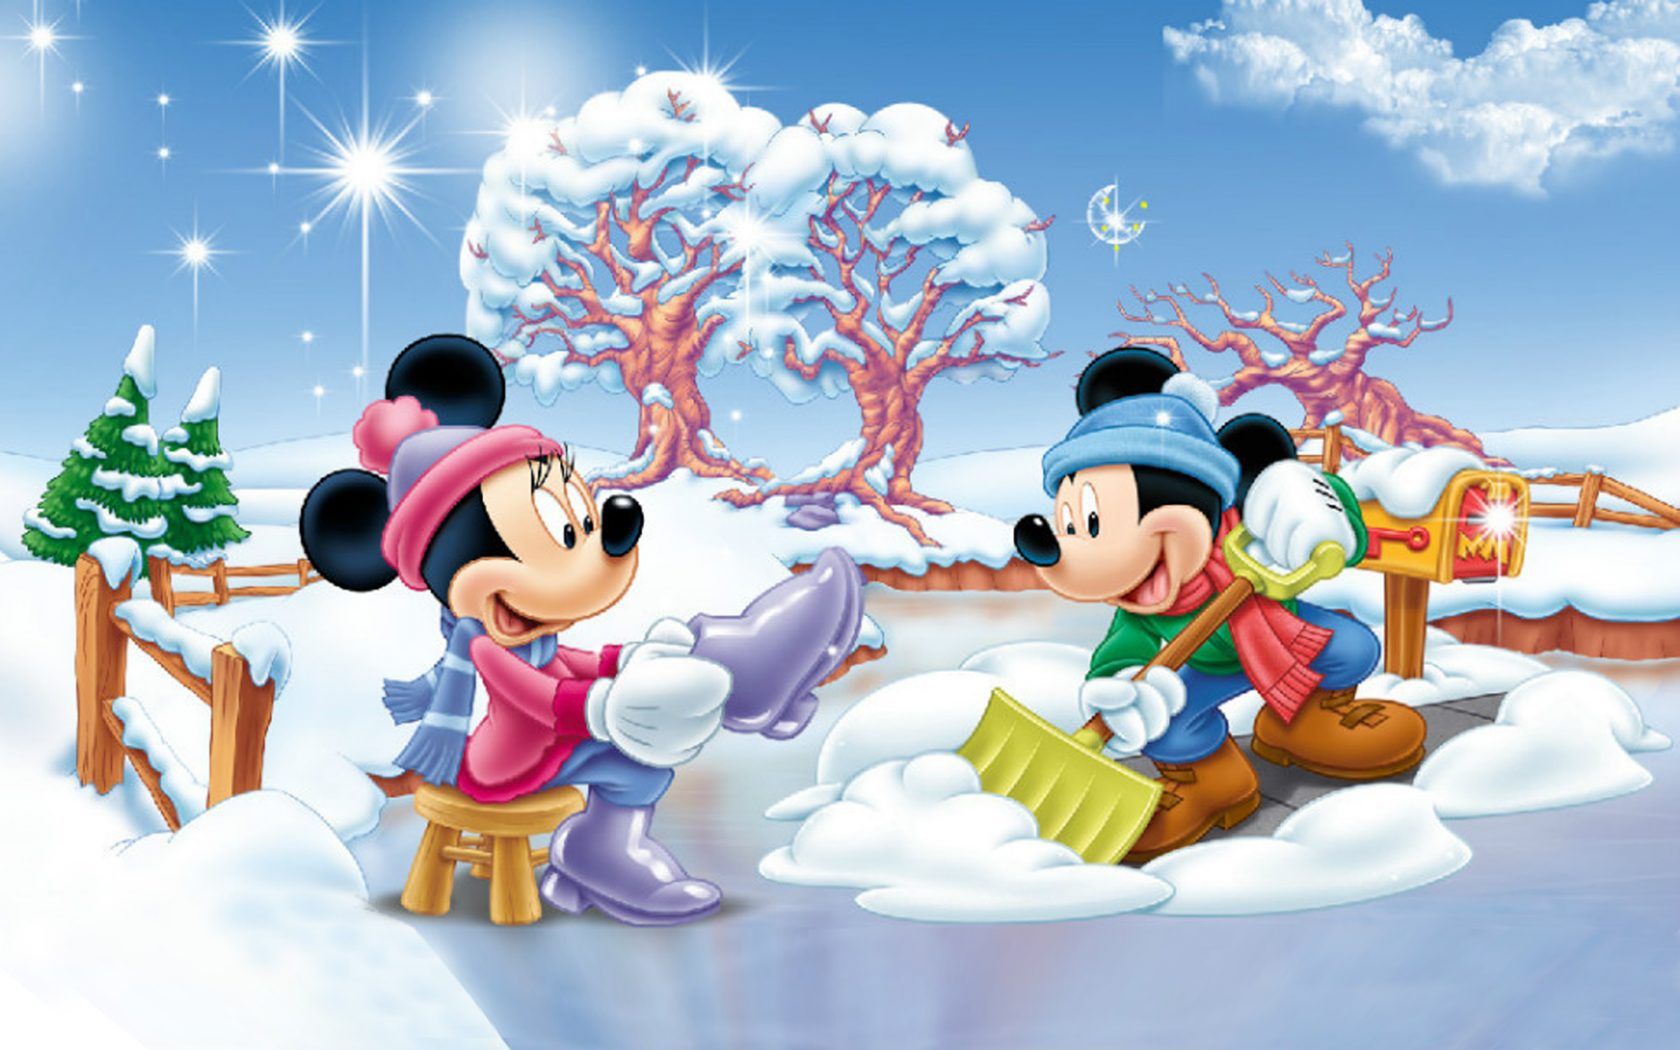 Minnie And Mickey Mouse Winter Snow Fence Yard Blue Sky Winter Clothes Full HD Wallpaper 1920x1200, Wallpaper13.com